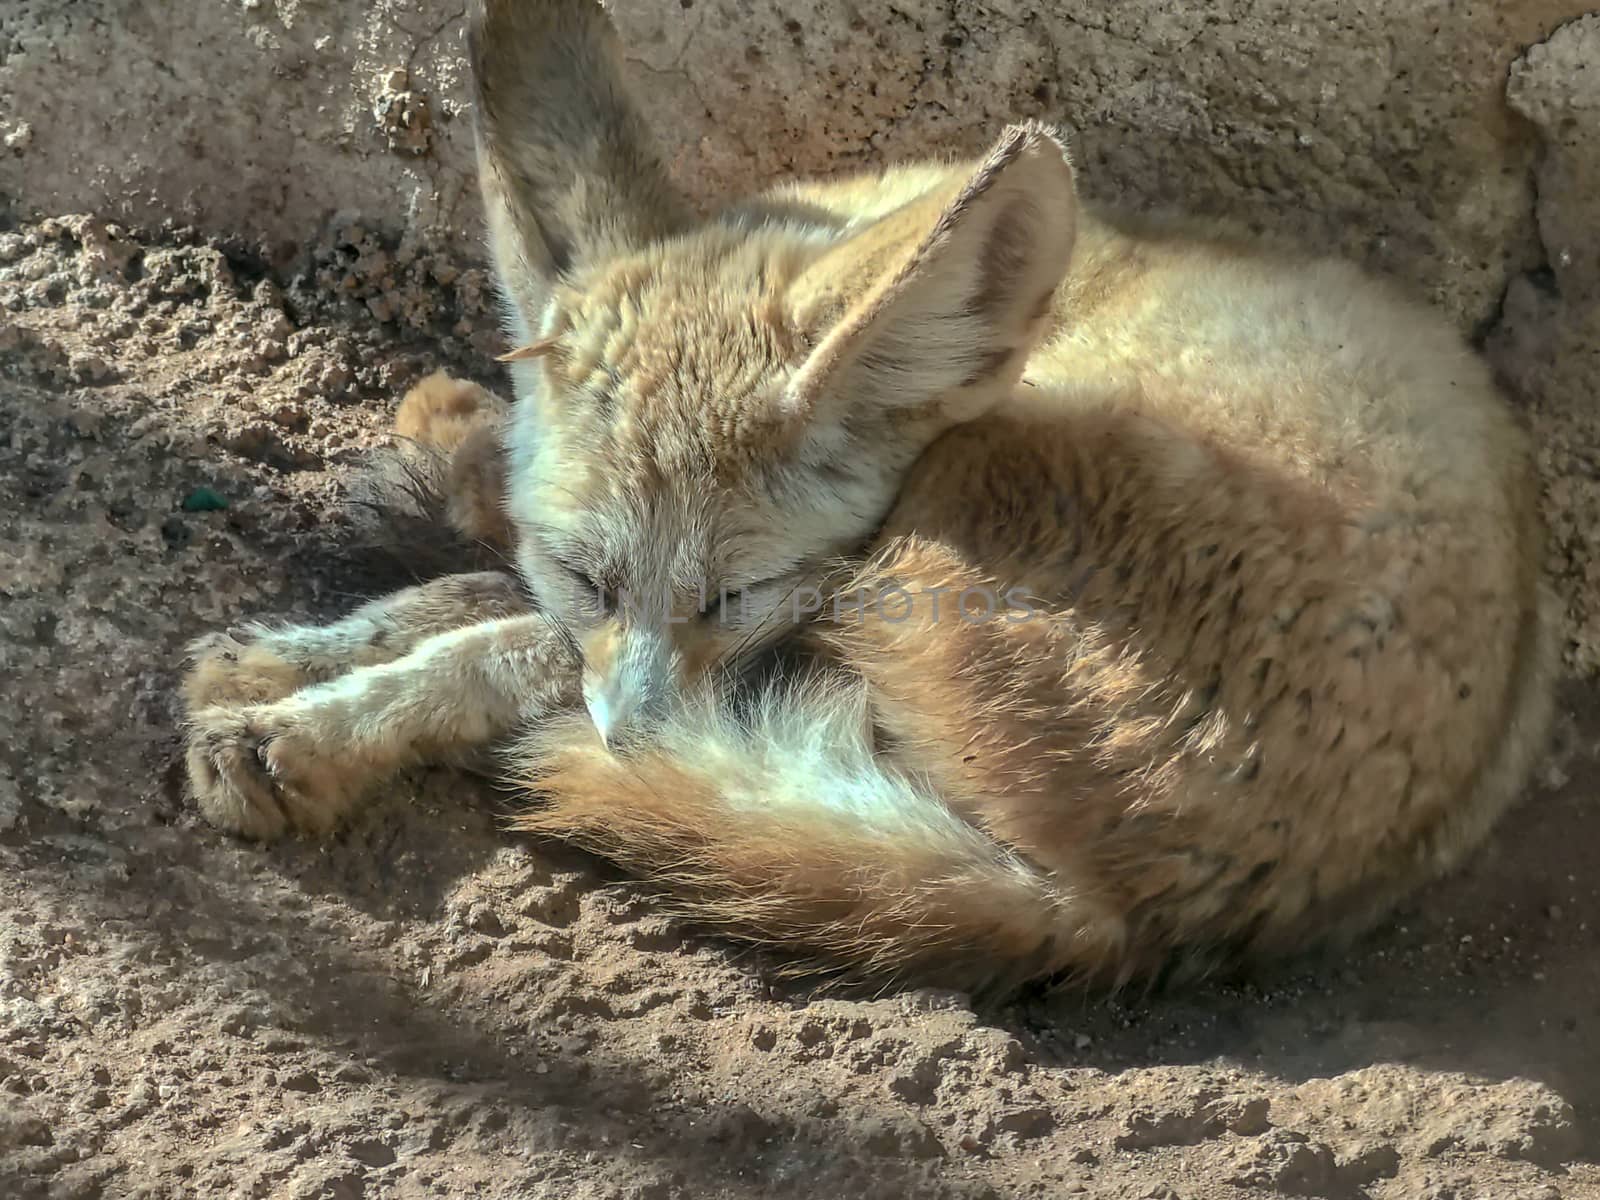 A fox sleeping quitely in the zoo by devoxer